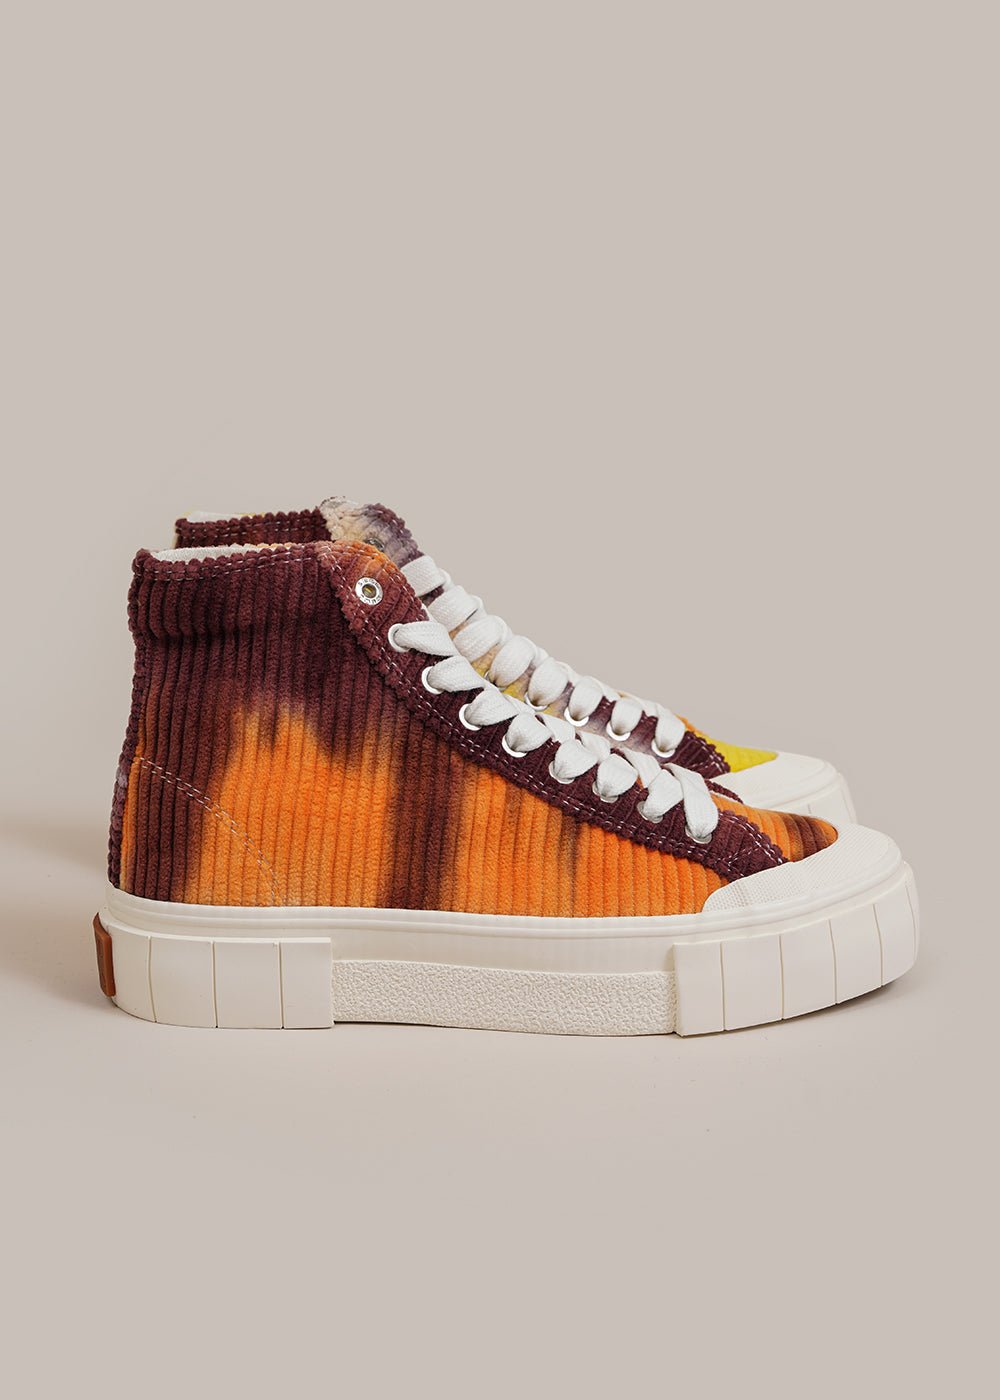 GOOD NEWS Palm Corduroy Sneakers - New Classics Studios Sustainable Ethical Fashion Canada